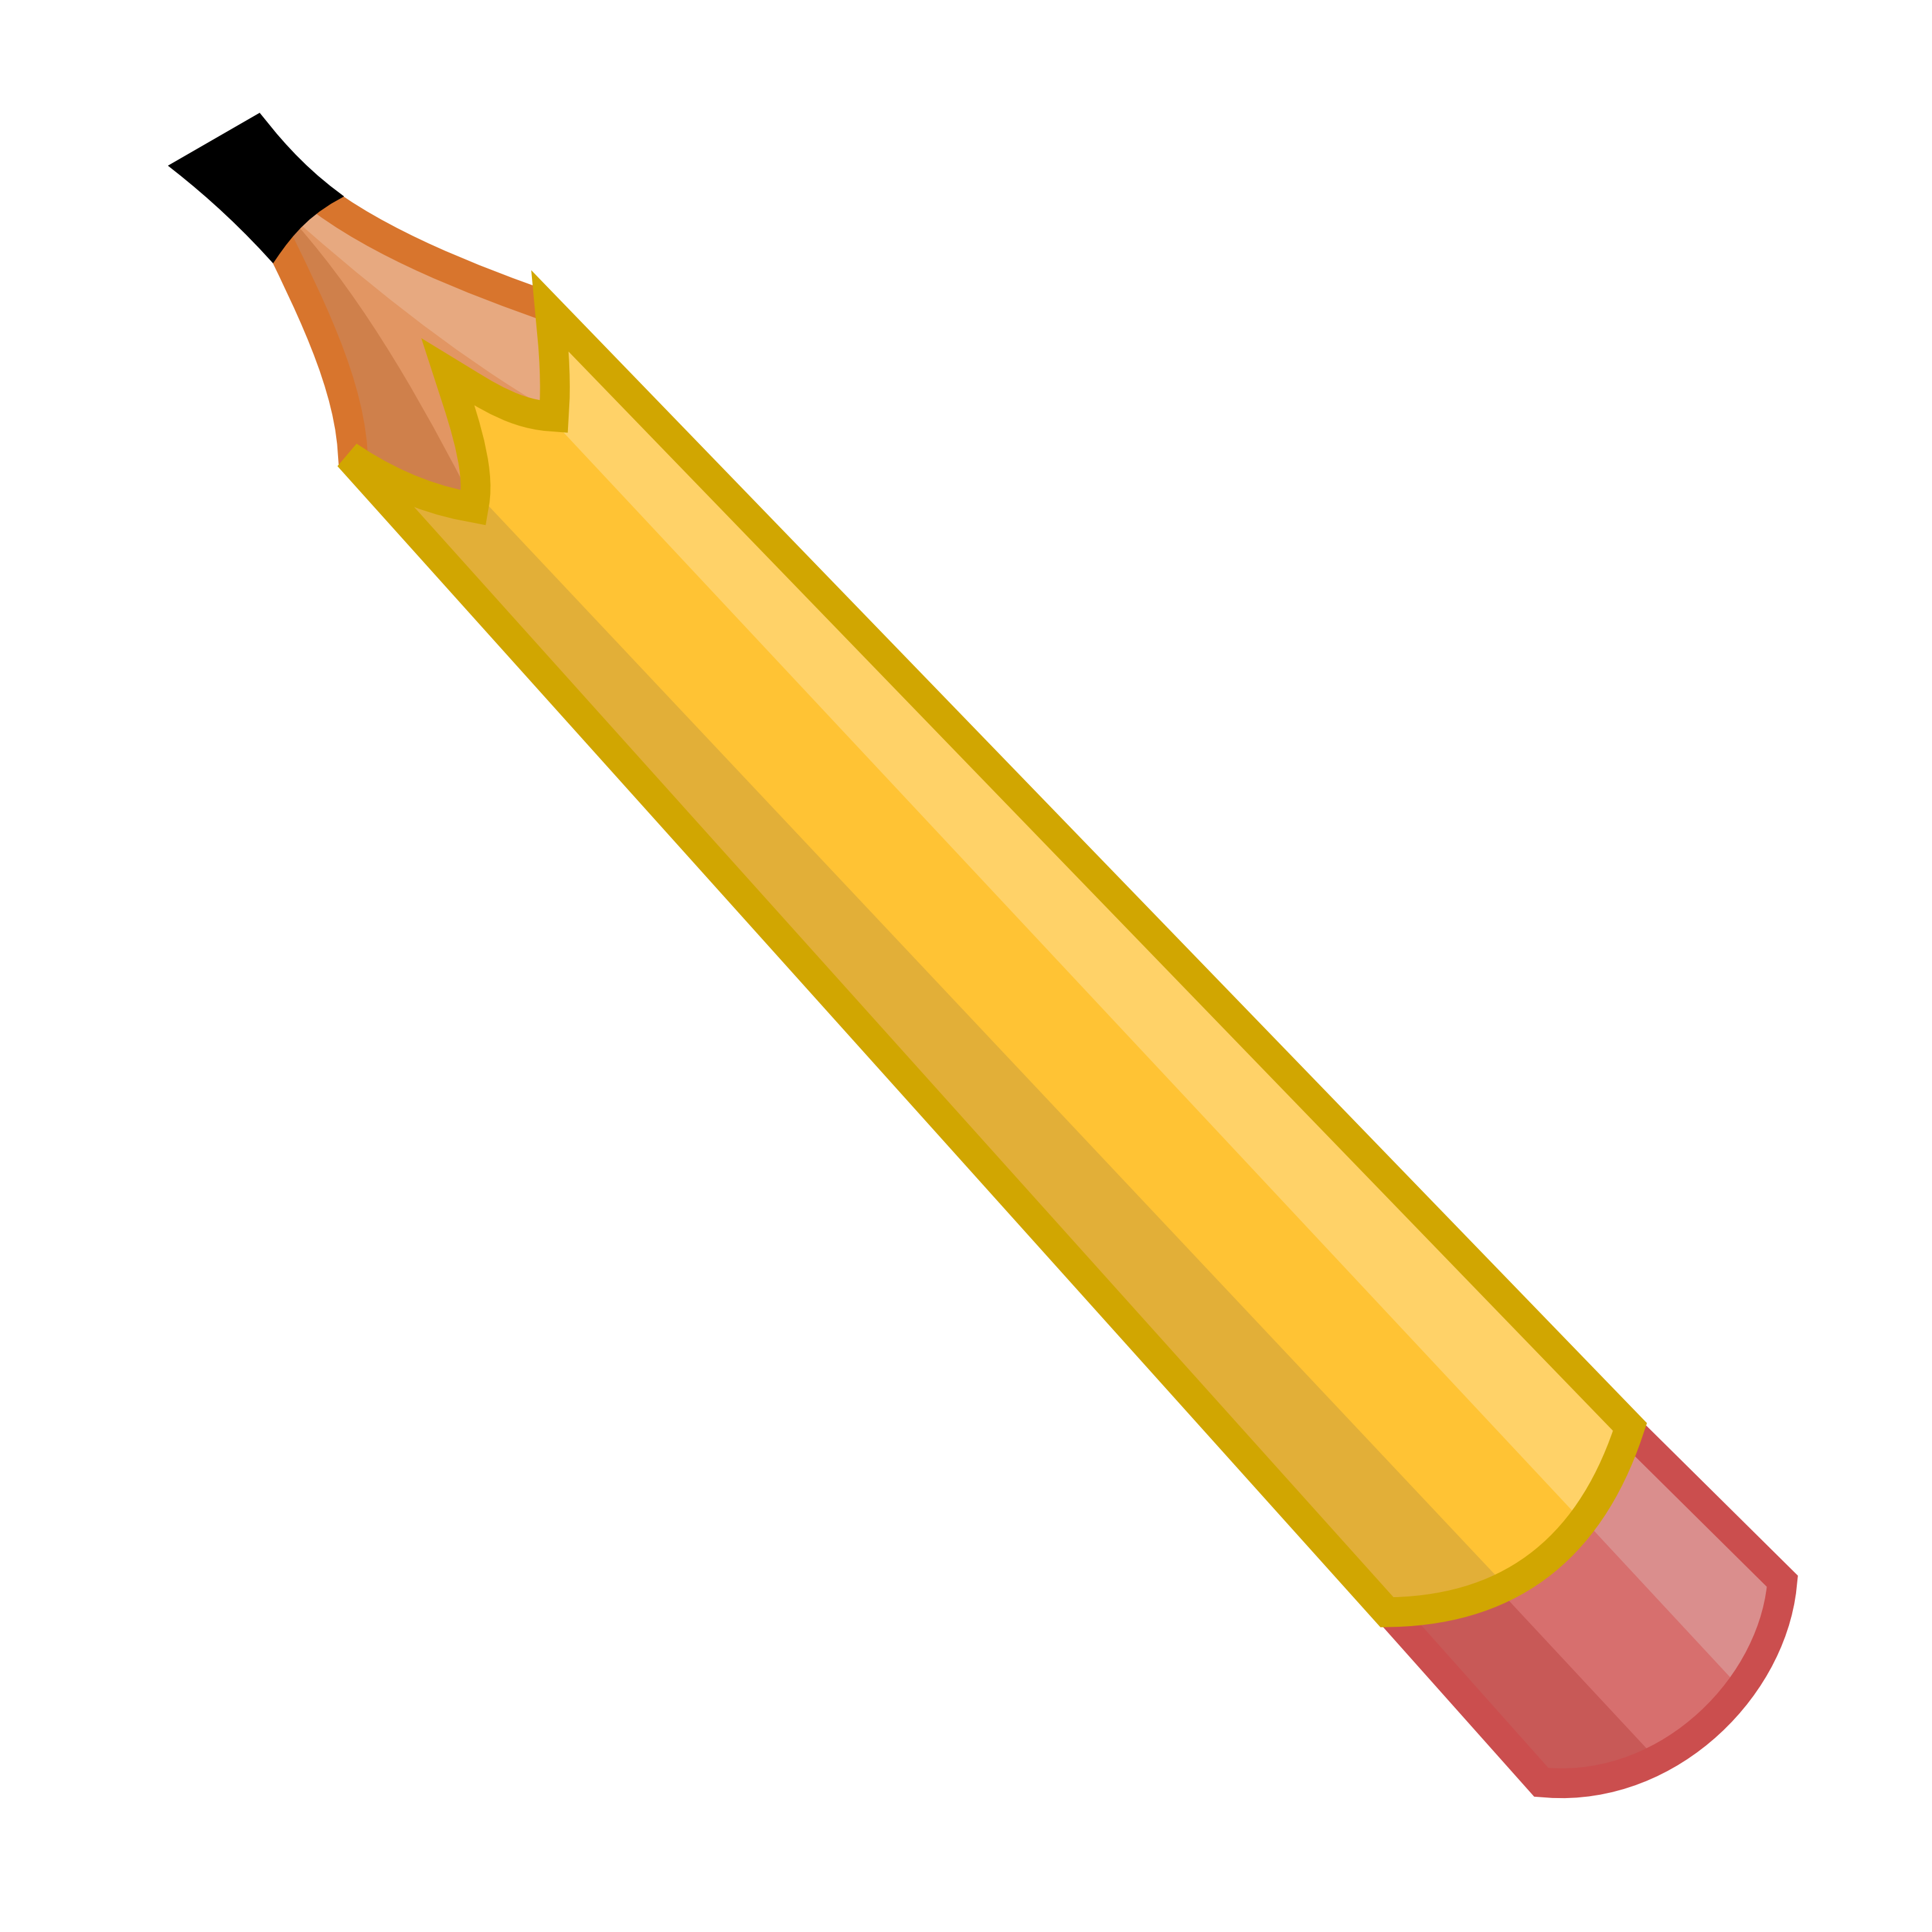 Vector - Pencil by MisterAibo on Clipart library